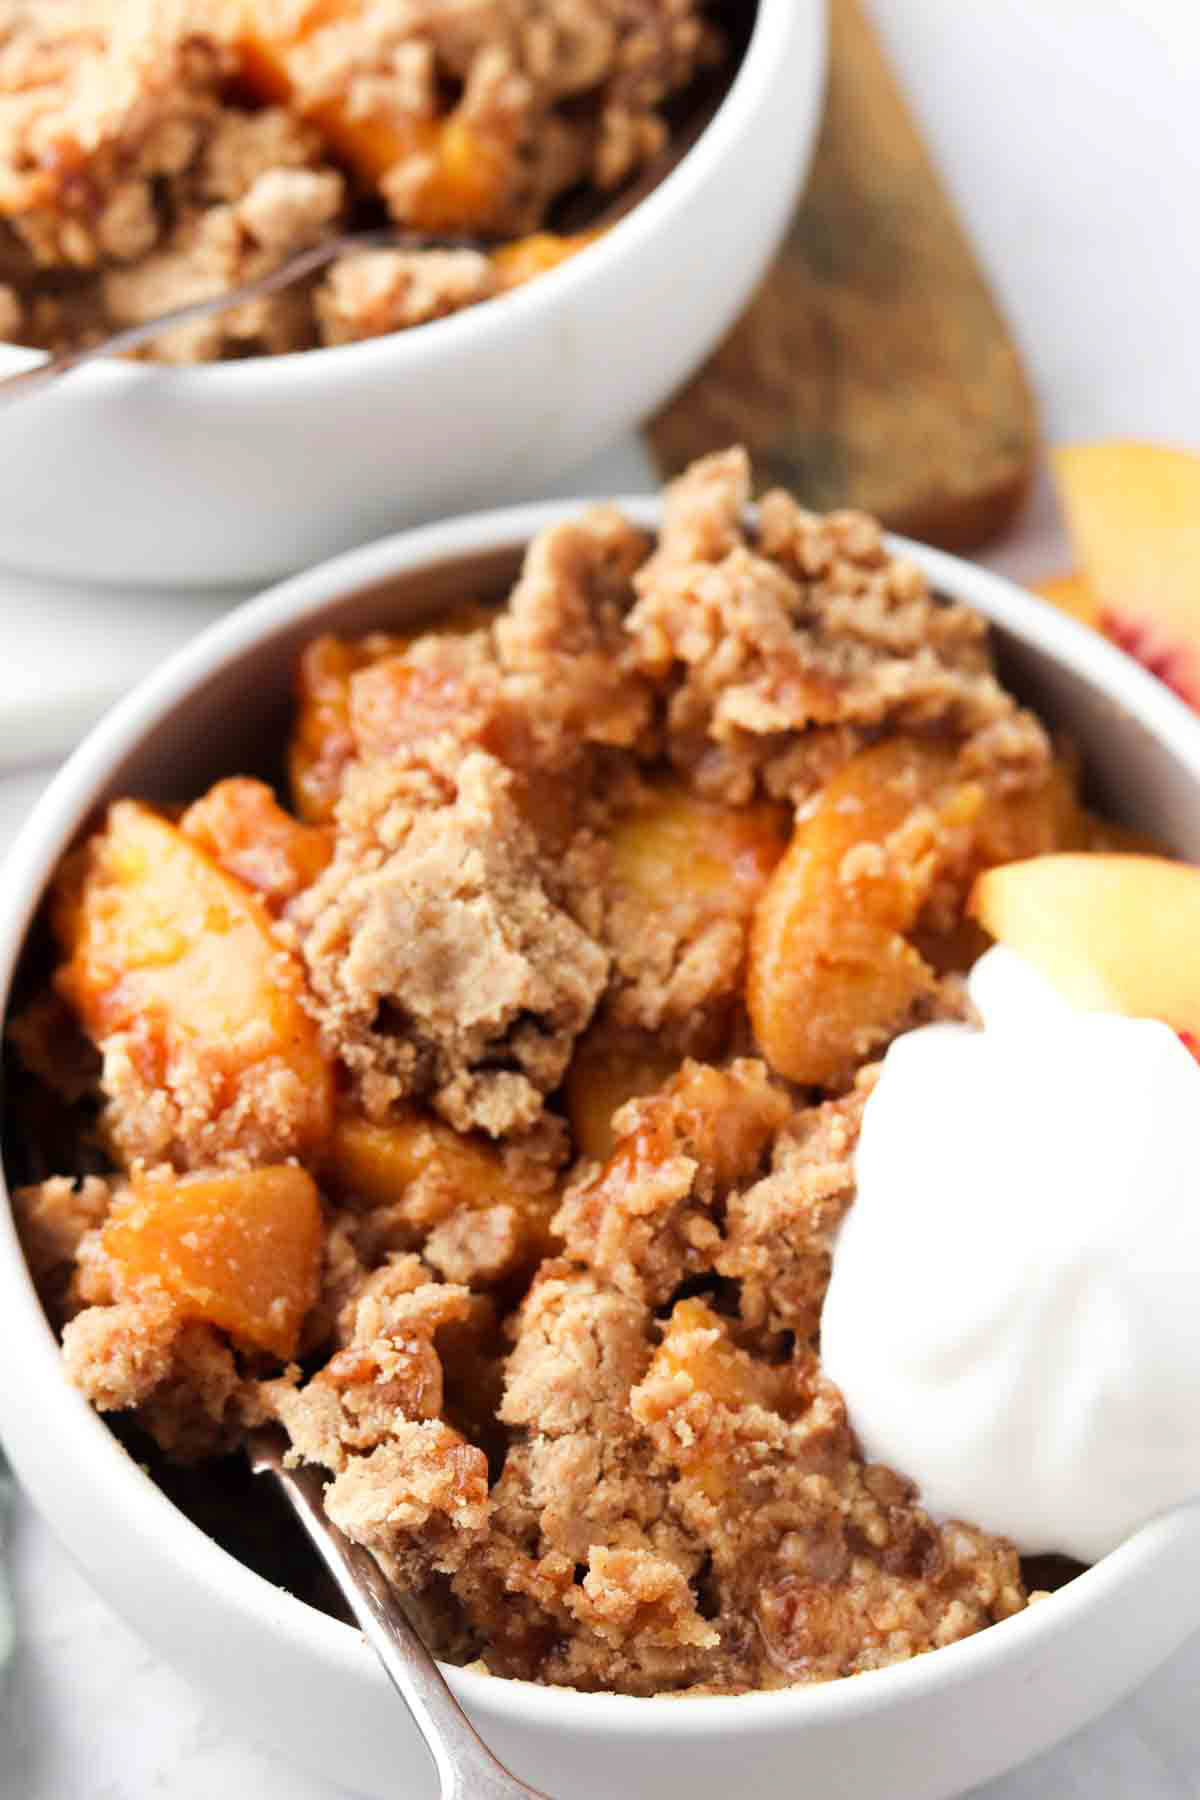 Peach cobbler in a white bowl with utensil inside dish.